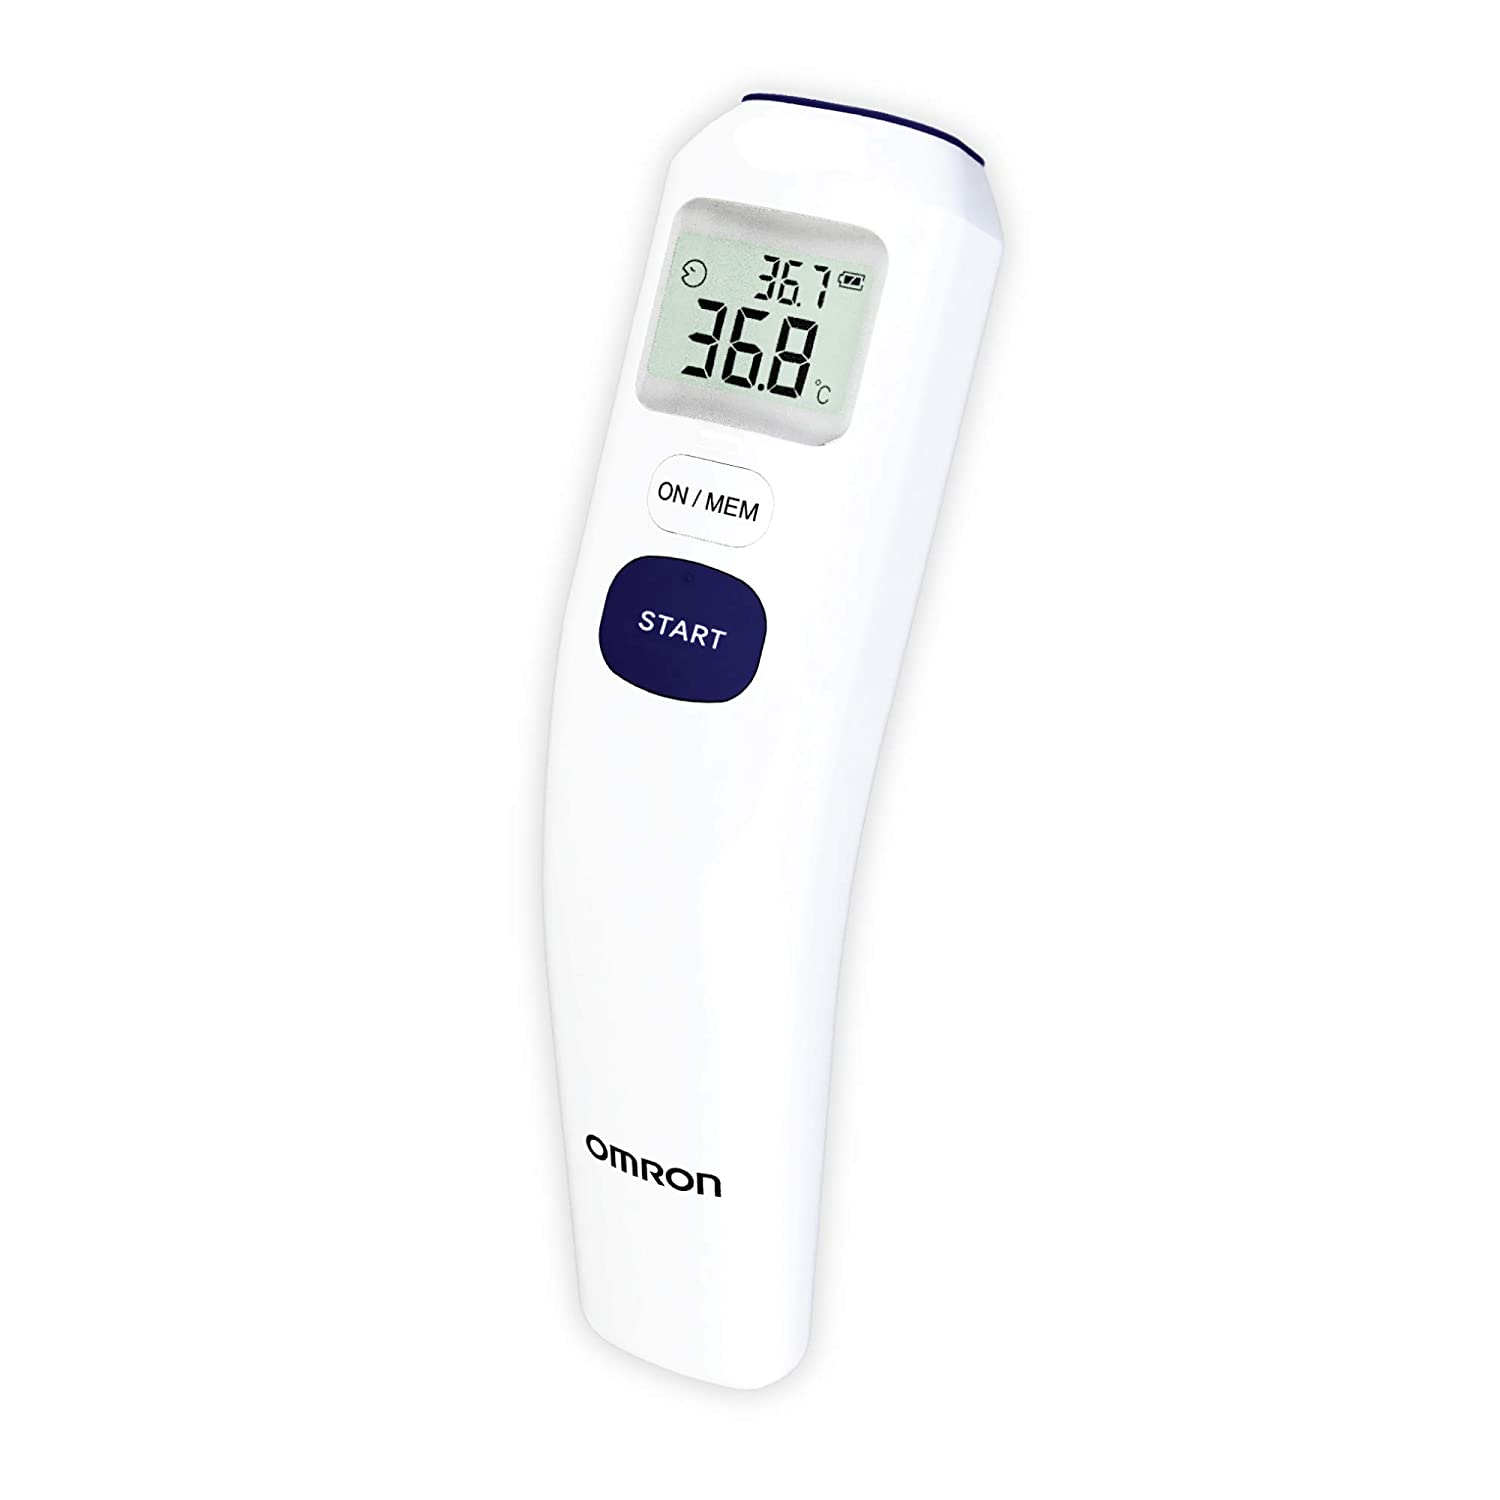 Omron MC 720 Non Contact Digital Infrared Forehead Thermometer With 1 Second Quick Measurement, 3 in 1 Measurement Mode